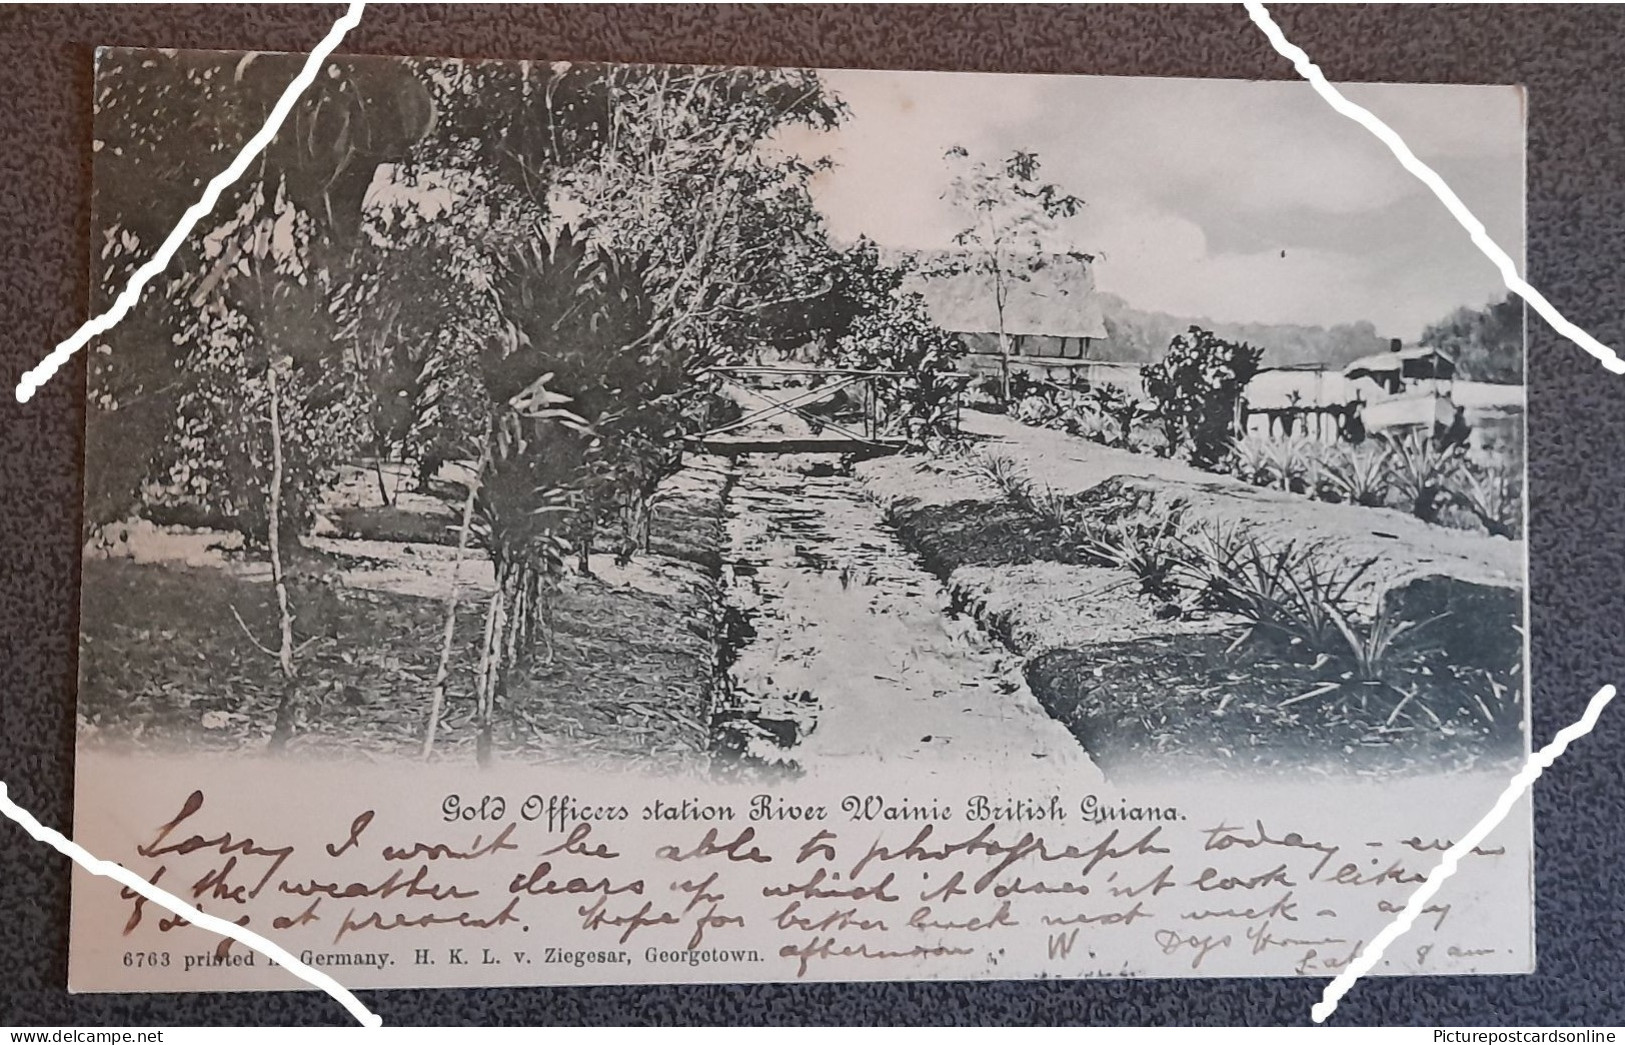 RARE GOLD OFFICES STATION RIVER WAINIE BRITISH GUIANA WEST INDIES OLD B/W POSTCARD SOUTH AMERICA MINING - Guyana (voorheen Brits Guyana)